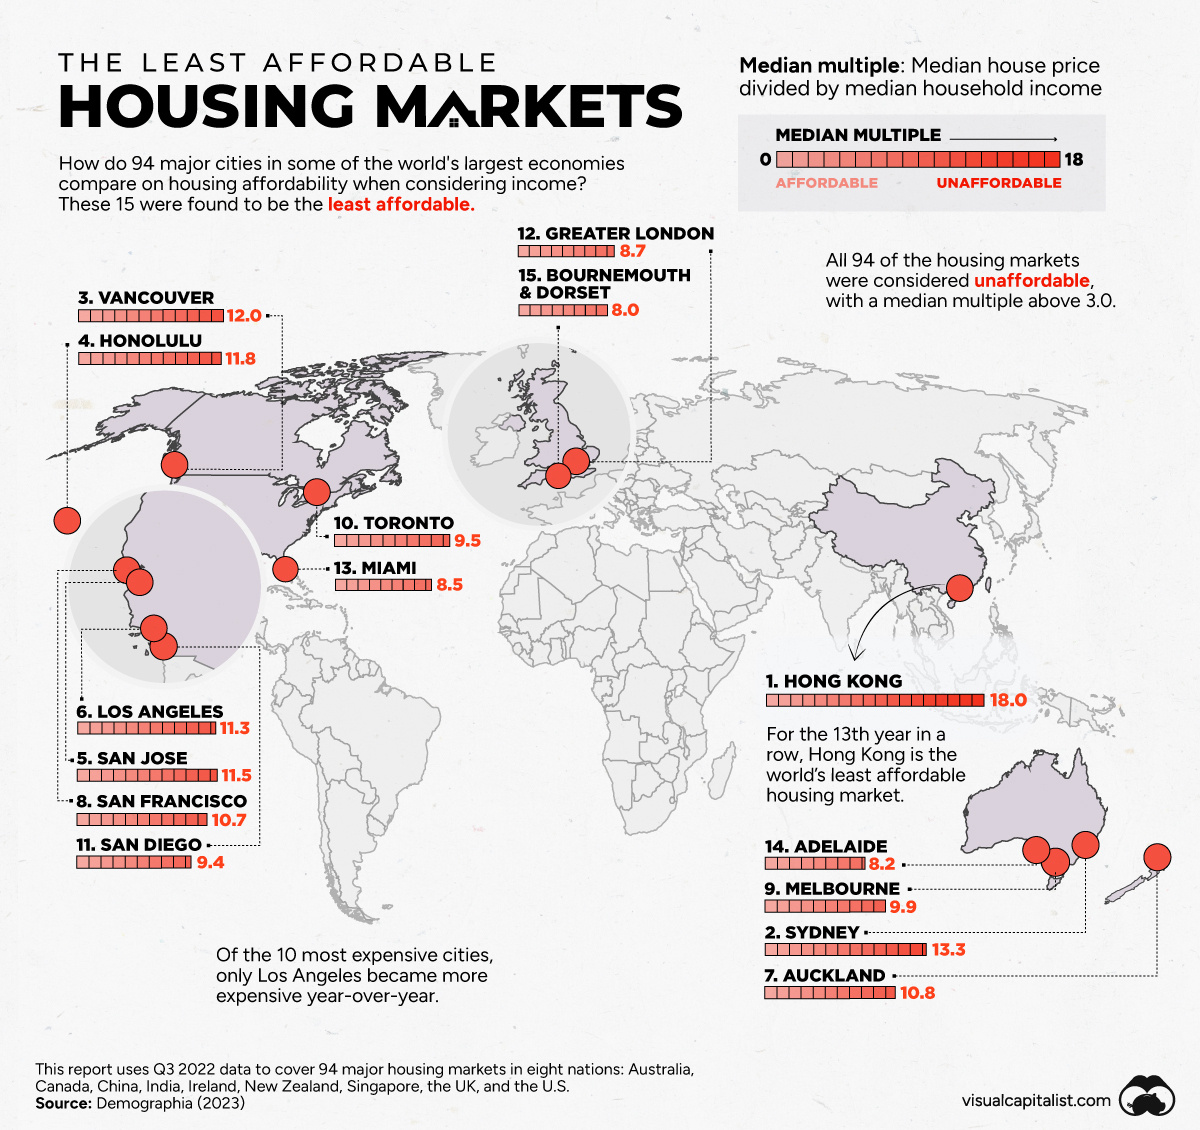 When considering where to live, big cities are attractive to people for a number of reasons, but affordability is usually not one of them. This map, using data from Demographia, highlights the major cities ranked the worst for housing market affordability on a global basis.